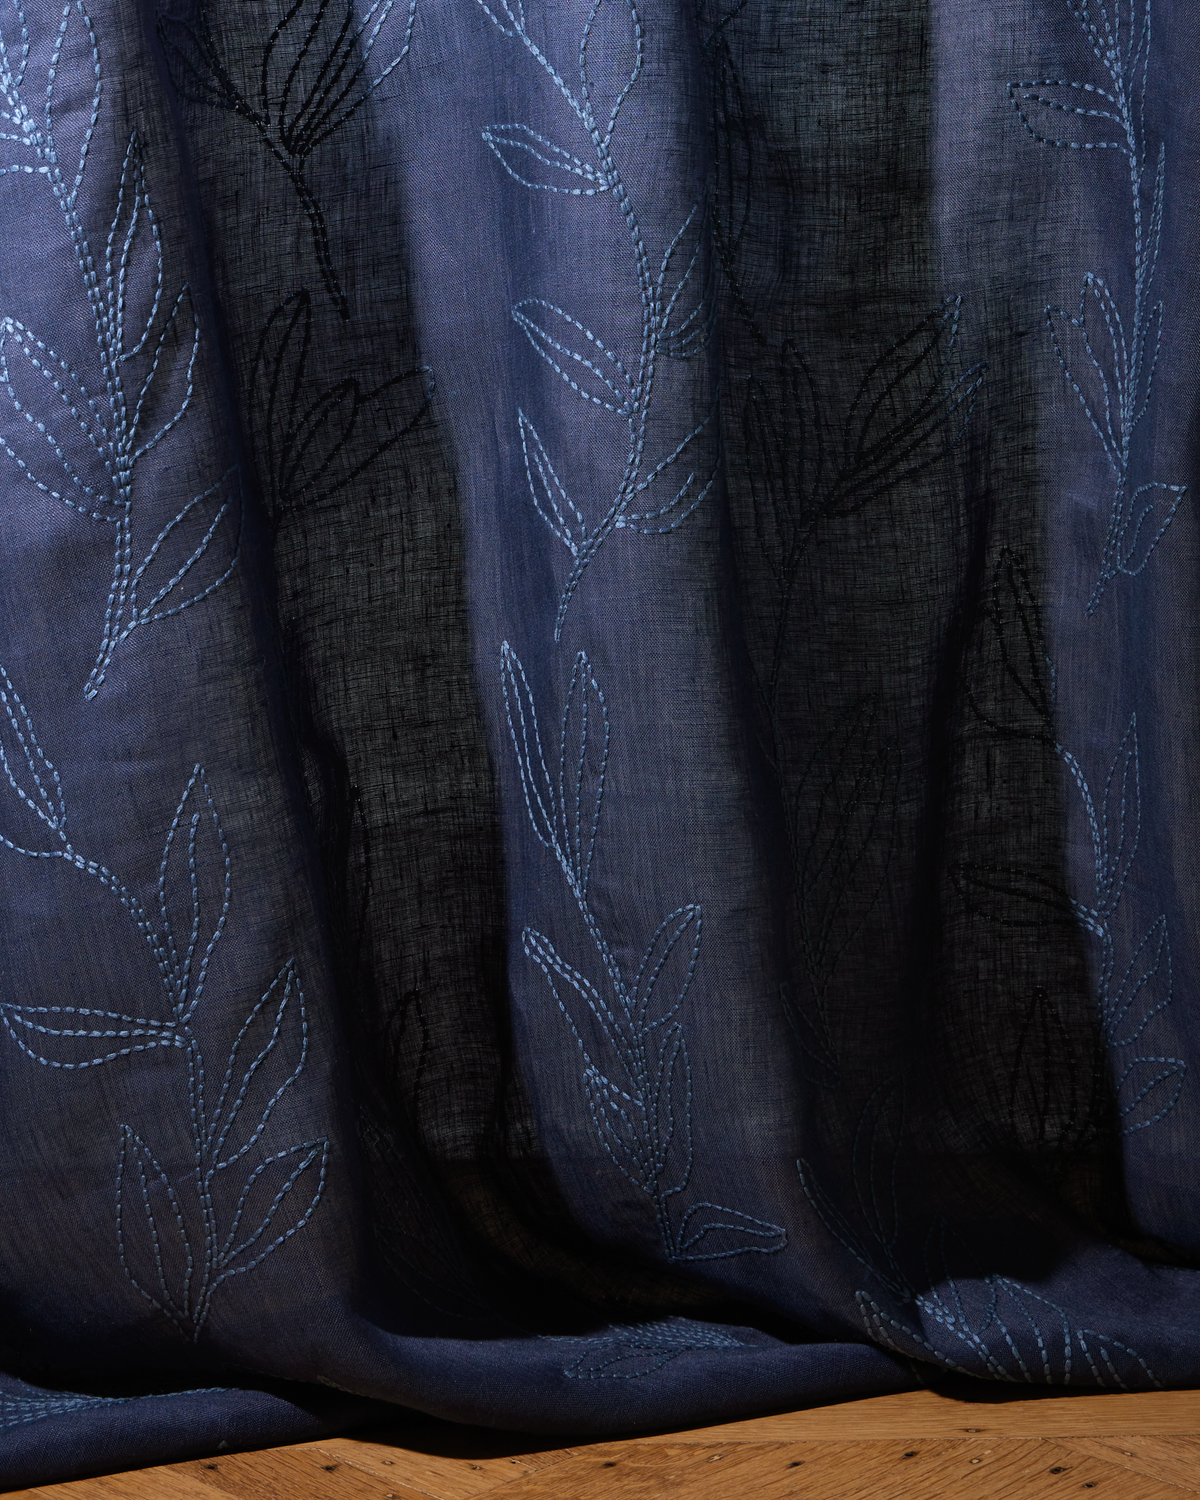 Linear Stem Sheer Fabric in Washed Navy